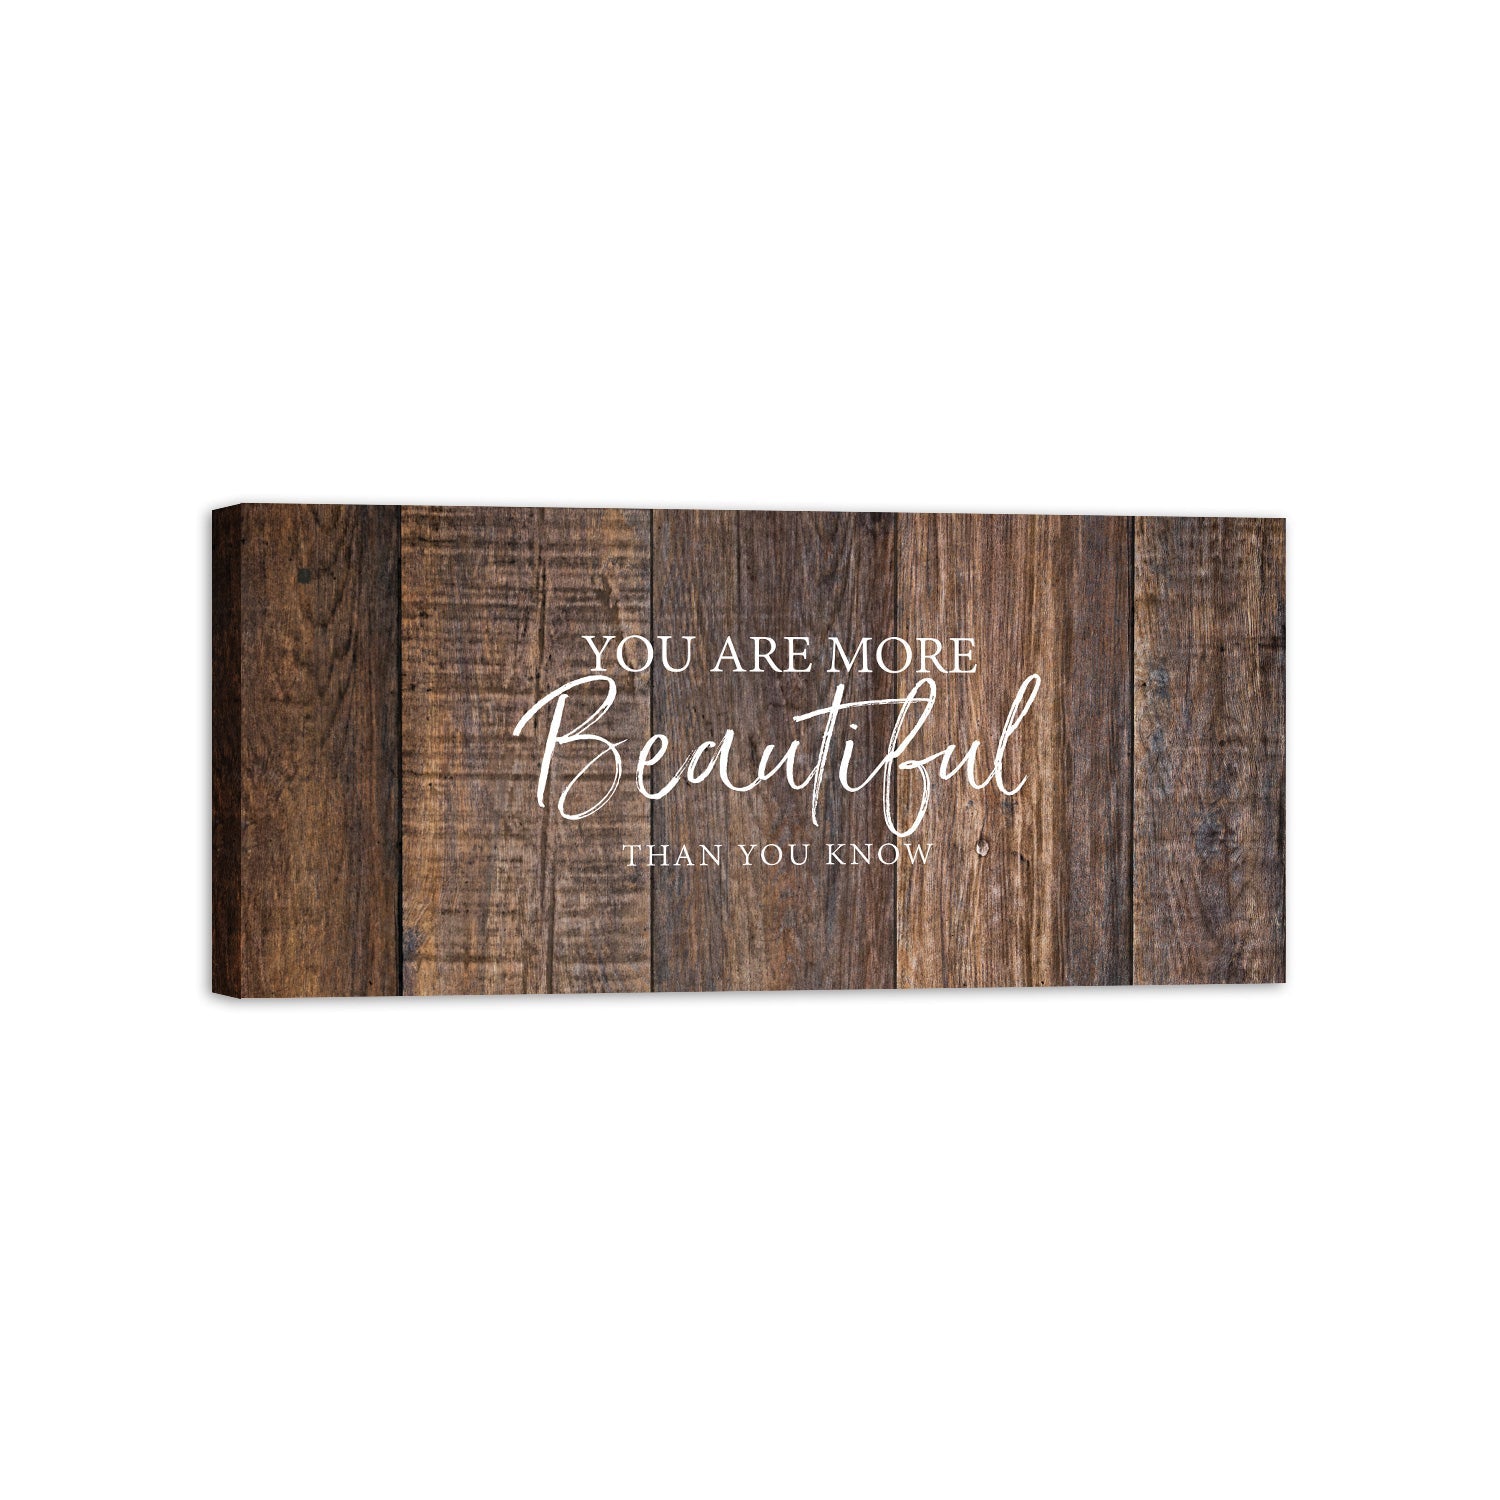 Every Love Story is Beautiful Inspirational Canvas Wall Art Framed Modern Wall Decor Decorative Accents For Walls Ready to Hang for Home Living Room Bedroom Entryway Kitchen Office Size 16” x 5.5” - LifeSong Milestones